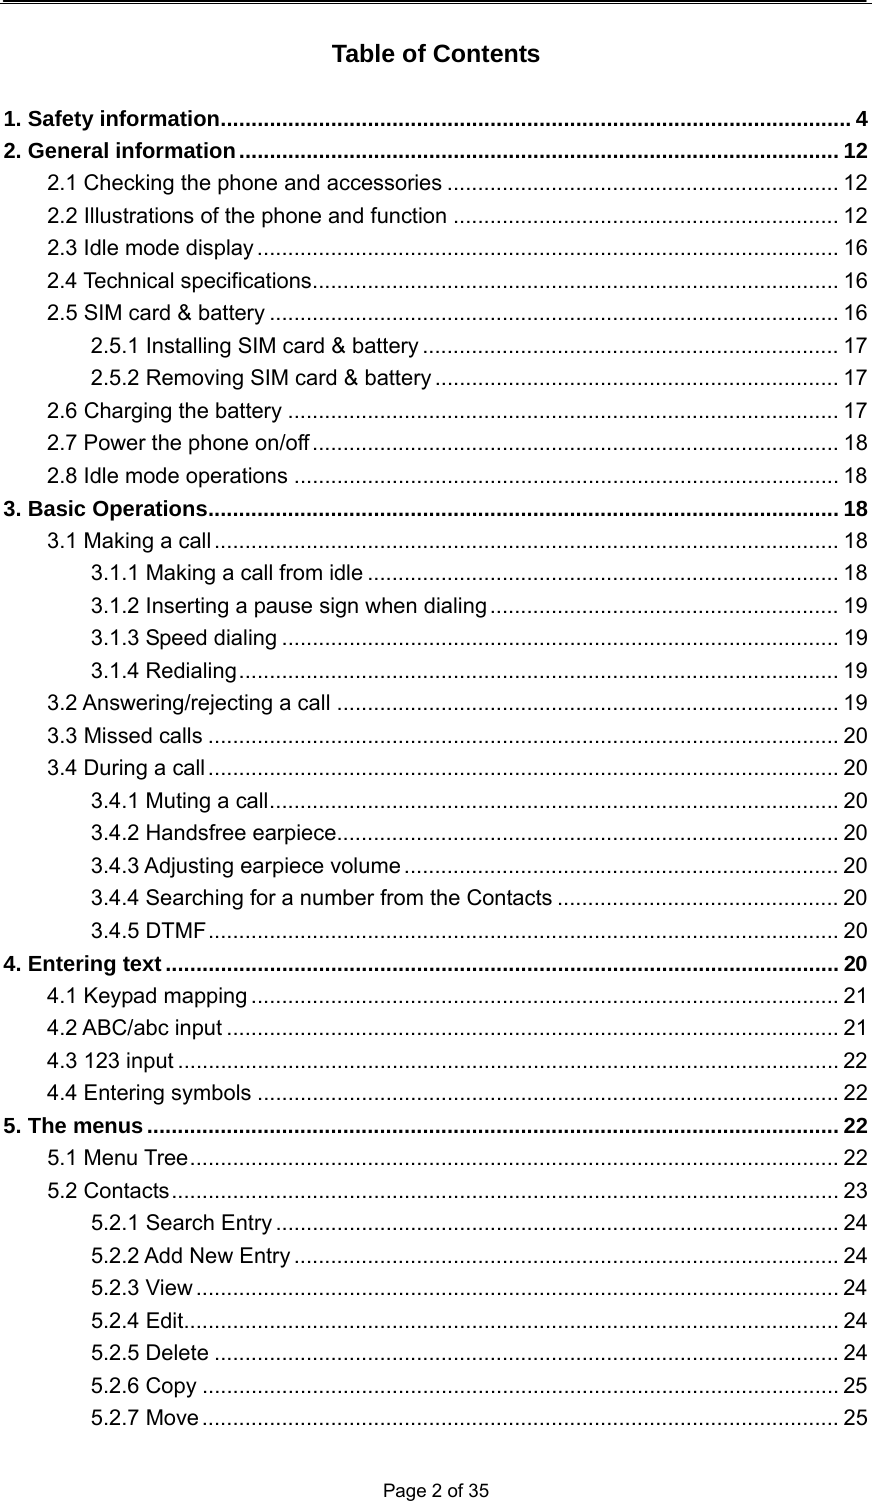  Page 2 of 35  Table of Contents  1. Safety information....................................................................................................... 4 2. General information.................................................................................................. 12 2.1 Checking the phone and accessories ................................................................ 12 2.2 Illustrations of the phone and function ............................................................... 12 2.3 Idle mode display ............................................................................................... 16 2.4 Technical specifications...................................................................................... 16 2.5 SIM card &amp; battery ............................................................................................. 16 2.5.1 Installing SIM card &amp; battery .................................................................... 17 2.5.2 Removing SIM card &amp; battery .................................................................. 17 2.6 Charging the battery .......................................................................................... 17 2.7 Power the phone on/off...................................................................................... 18 2.8 Idle mode operations ......................................................................................... 18 3. Basic Operations....................................................................................................... 18 3.1 Making a call ...................................................................................................... 18 3.1.1 Making a call from idle ............................................................................. 18 3.1.2 Inserting a pause sign when dialing......................................................... 19 3.1.3 Speed dialing ........................................................................................... 19 3.1.4 Redialing.................................................................................................. 19 3.2 Answering/rejecting a call .................................................................................. 19 3.3 Missed calls ....................................................................................................... 20 3.4 During a call ....................................................................................................... 20 3.4.1 Muting a call............................................................................................. 20 3.4.2 Handsfree earpiece.................................................................................. 20 3.4.3 Adjusting earpiece volume ....................................................................... 20 3.4.4 Searching for a number from the Contacts .............................................. 20 3.4.5 DTMF....................................................................................................... 20 4. Entering text.............................................................................................................. 20 4.1 Keypad mapping ................................................................................................ 21 4.2 ABC/abc input .................................................................................................... 21 4.3 123 input ............................................................................................................ 22 4.4 Entering symbols ............................................................................................... 22 5. The menus................................................................................................................. 22 5.1 Menu Tree.......................................................................................................... 22 5.2 Contacts............................................................................................................. 23 5.2.1 Search Entry ............................................................................................ 24 5.2.2 Add New Entry ......................................................................................... 24 5.2.3 View ......................................................................................................... 24 5.2.4 Edit........................................................................................................... 24 5.2.5 Delete ...................................................................................................... 24 5.2.6 Copy ........................................................................................................ 25 5.2.7 Move........................................................................................................ 25 